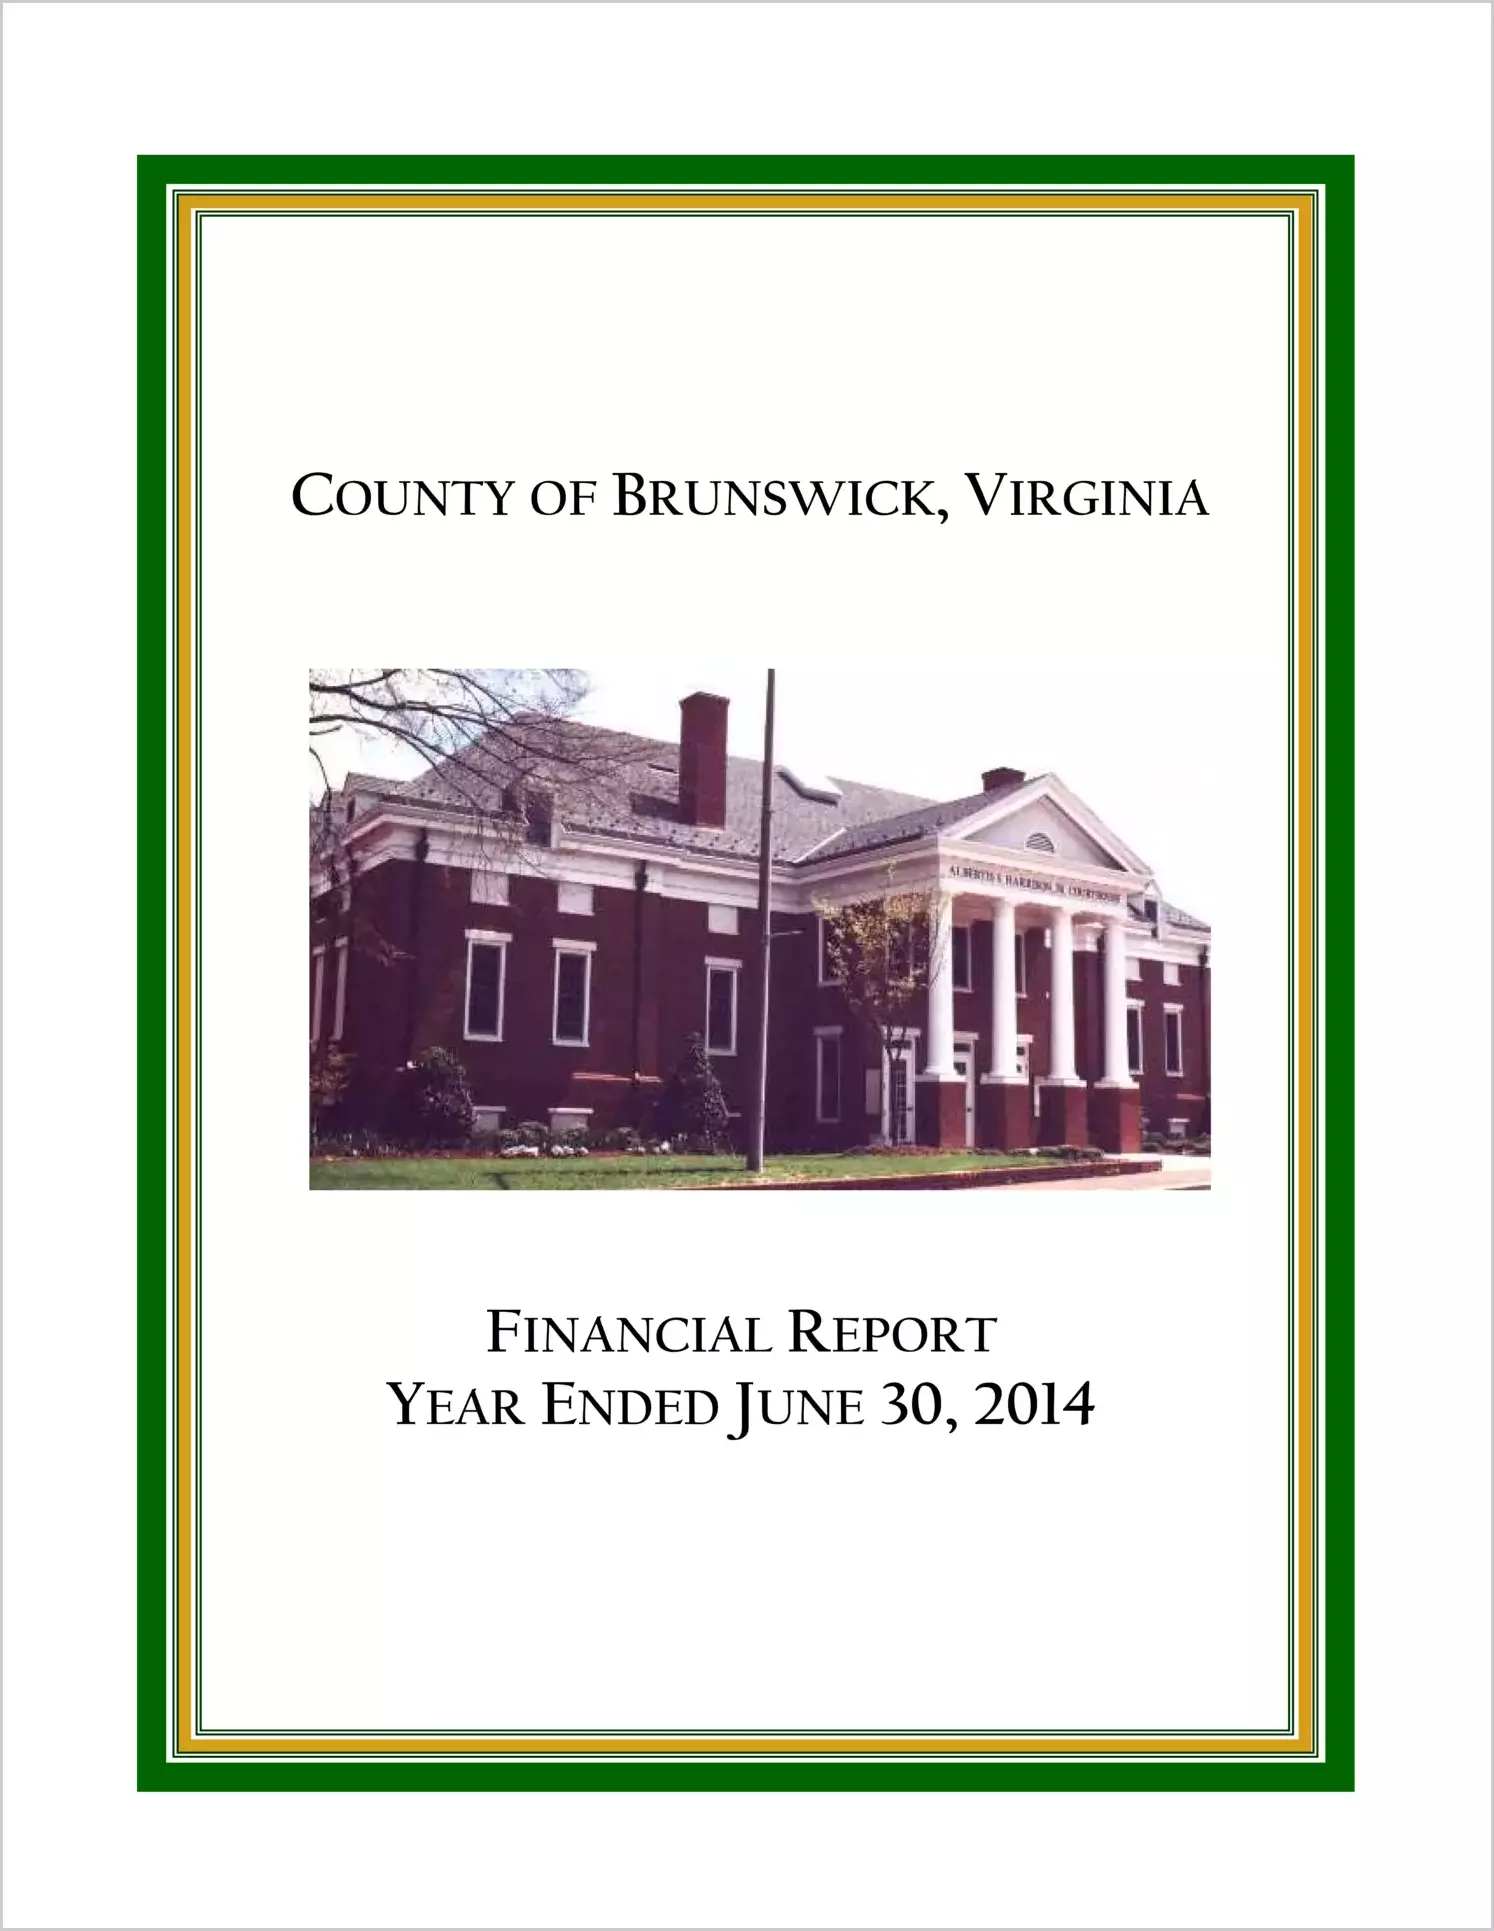 2014 Annual Financial Report for County of Brunswick